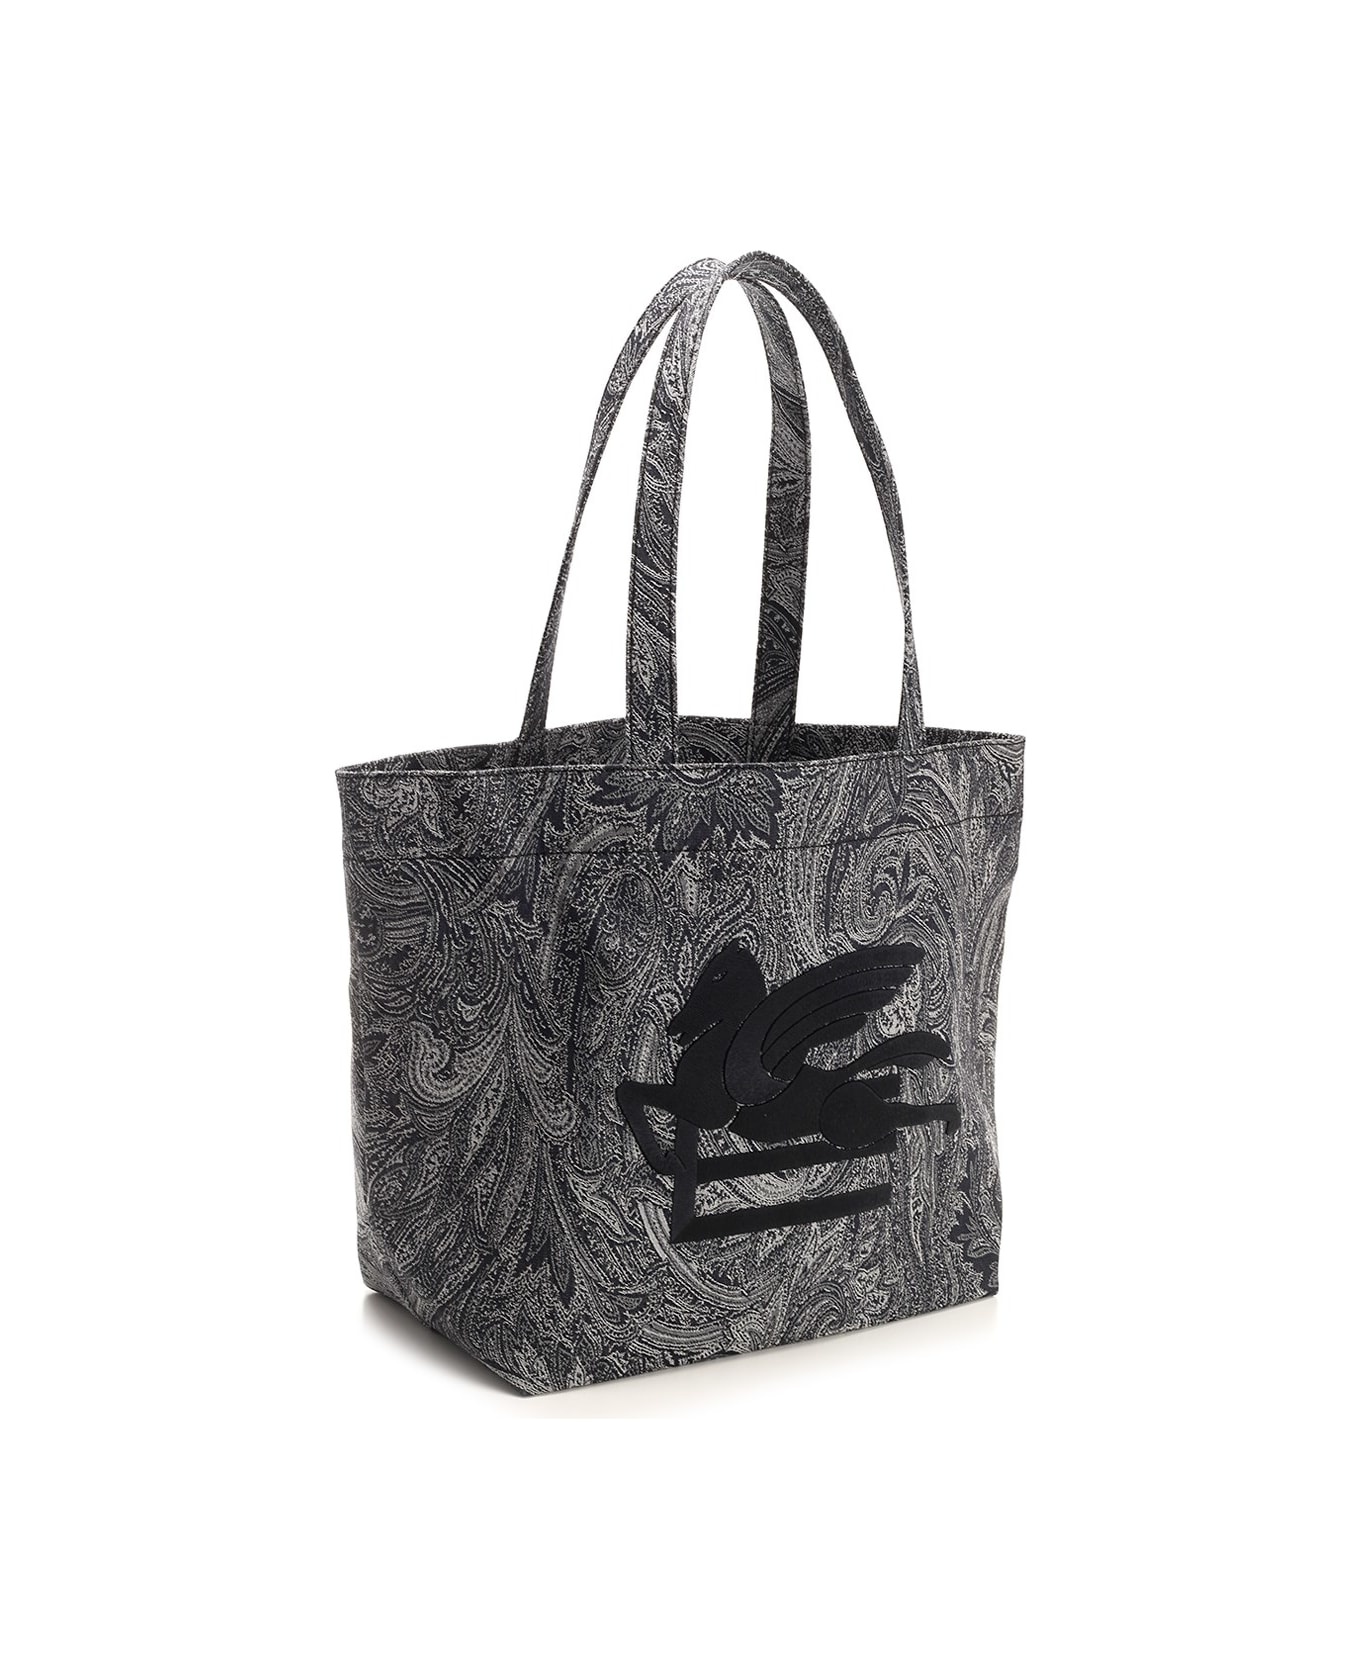 Navy Blue Large Tote Bag With Paisley Jacquard Motif - 2